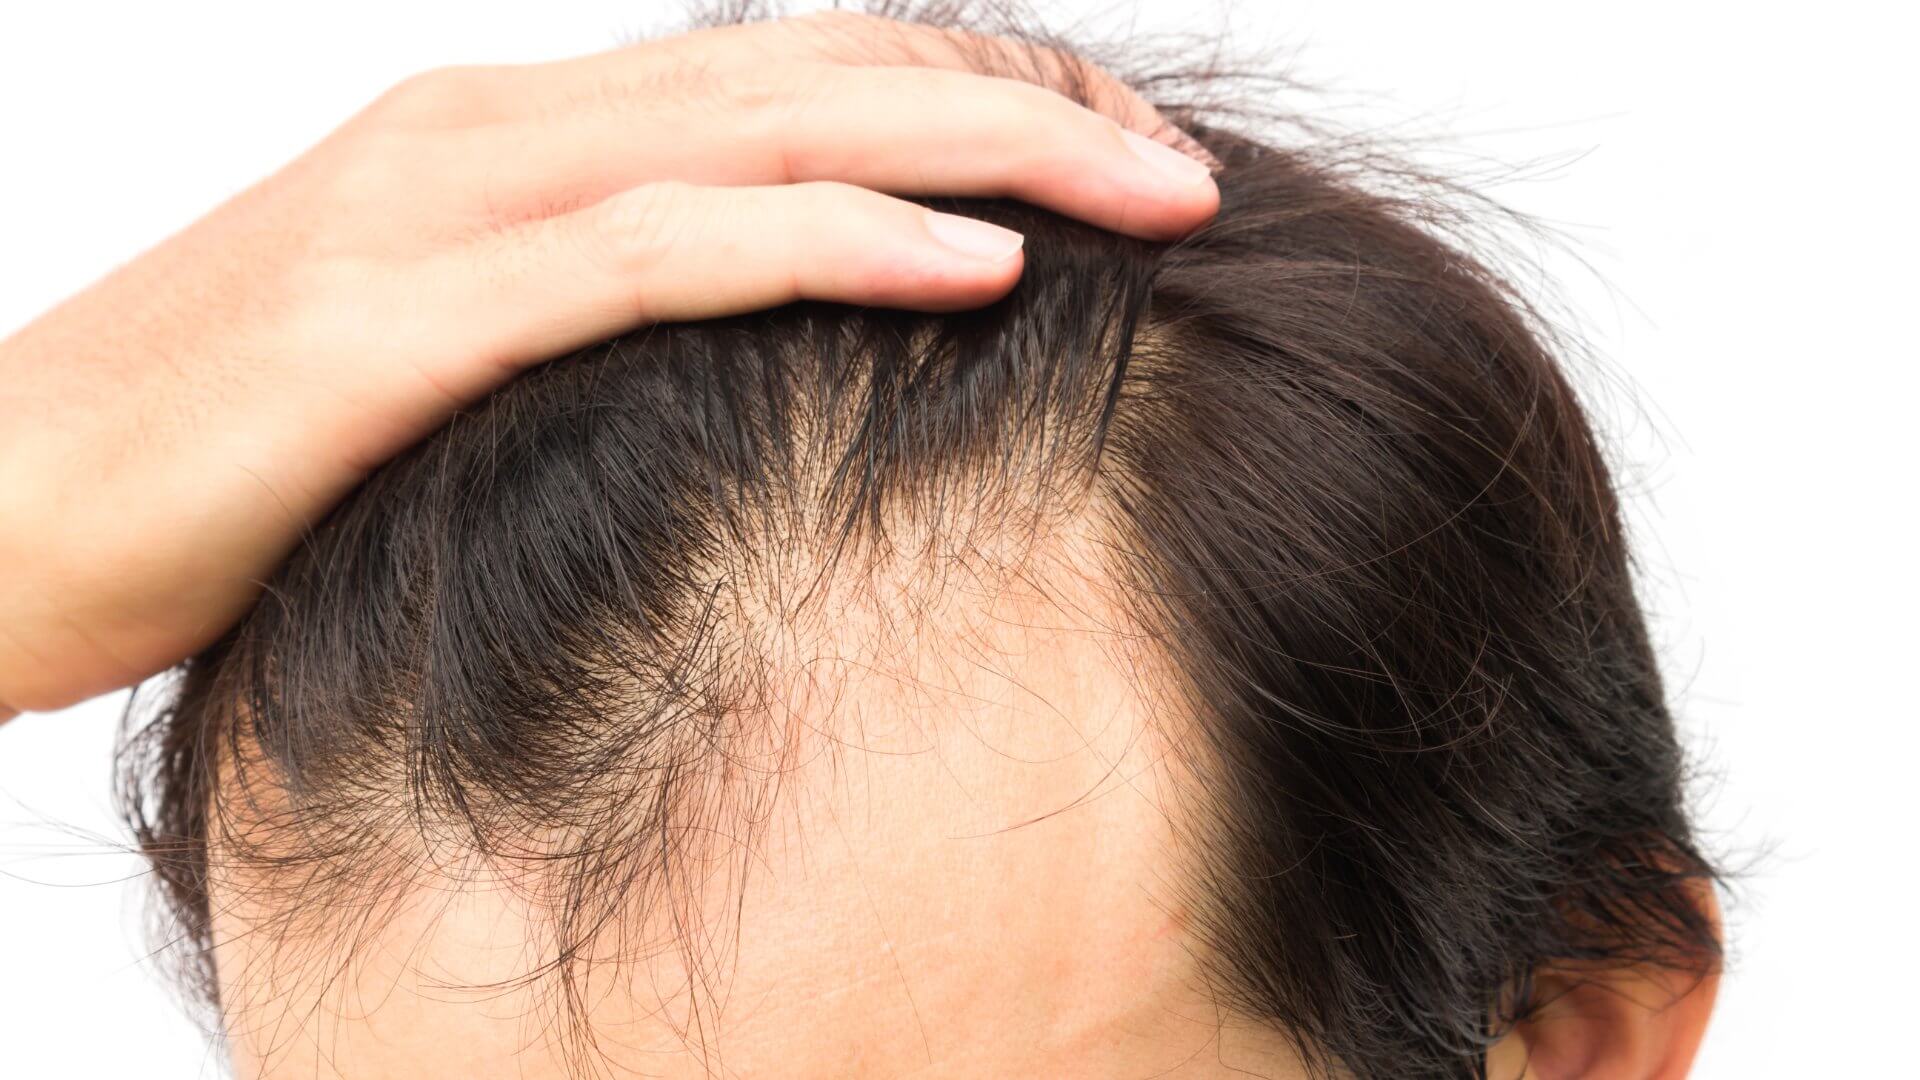 Hair Removal and Hair Restoration: We’ve Got Both!